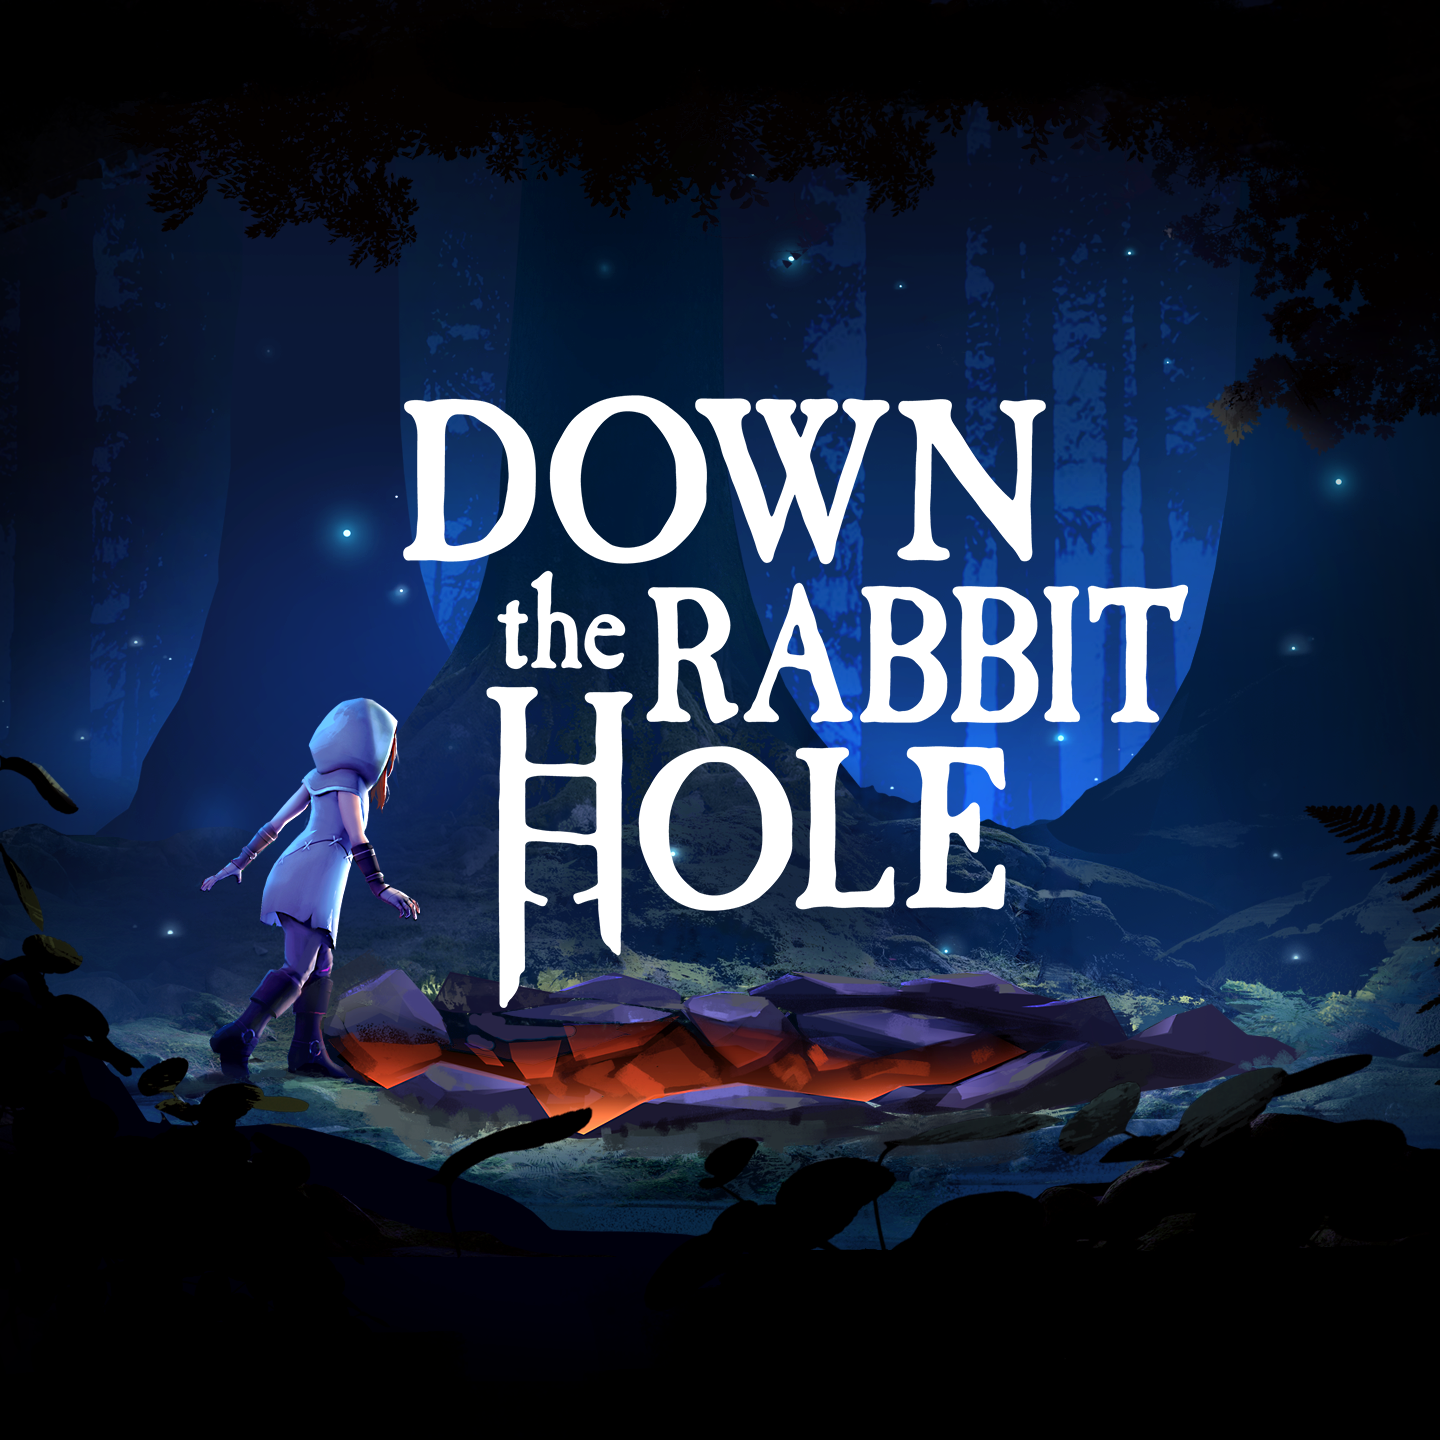 Rabbit hole download. Down the Rabbit hole. Rabbit hole игра. The Rabbit hole VR. Down the Rabit hole.